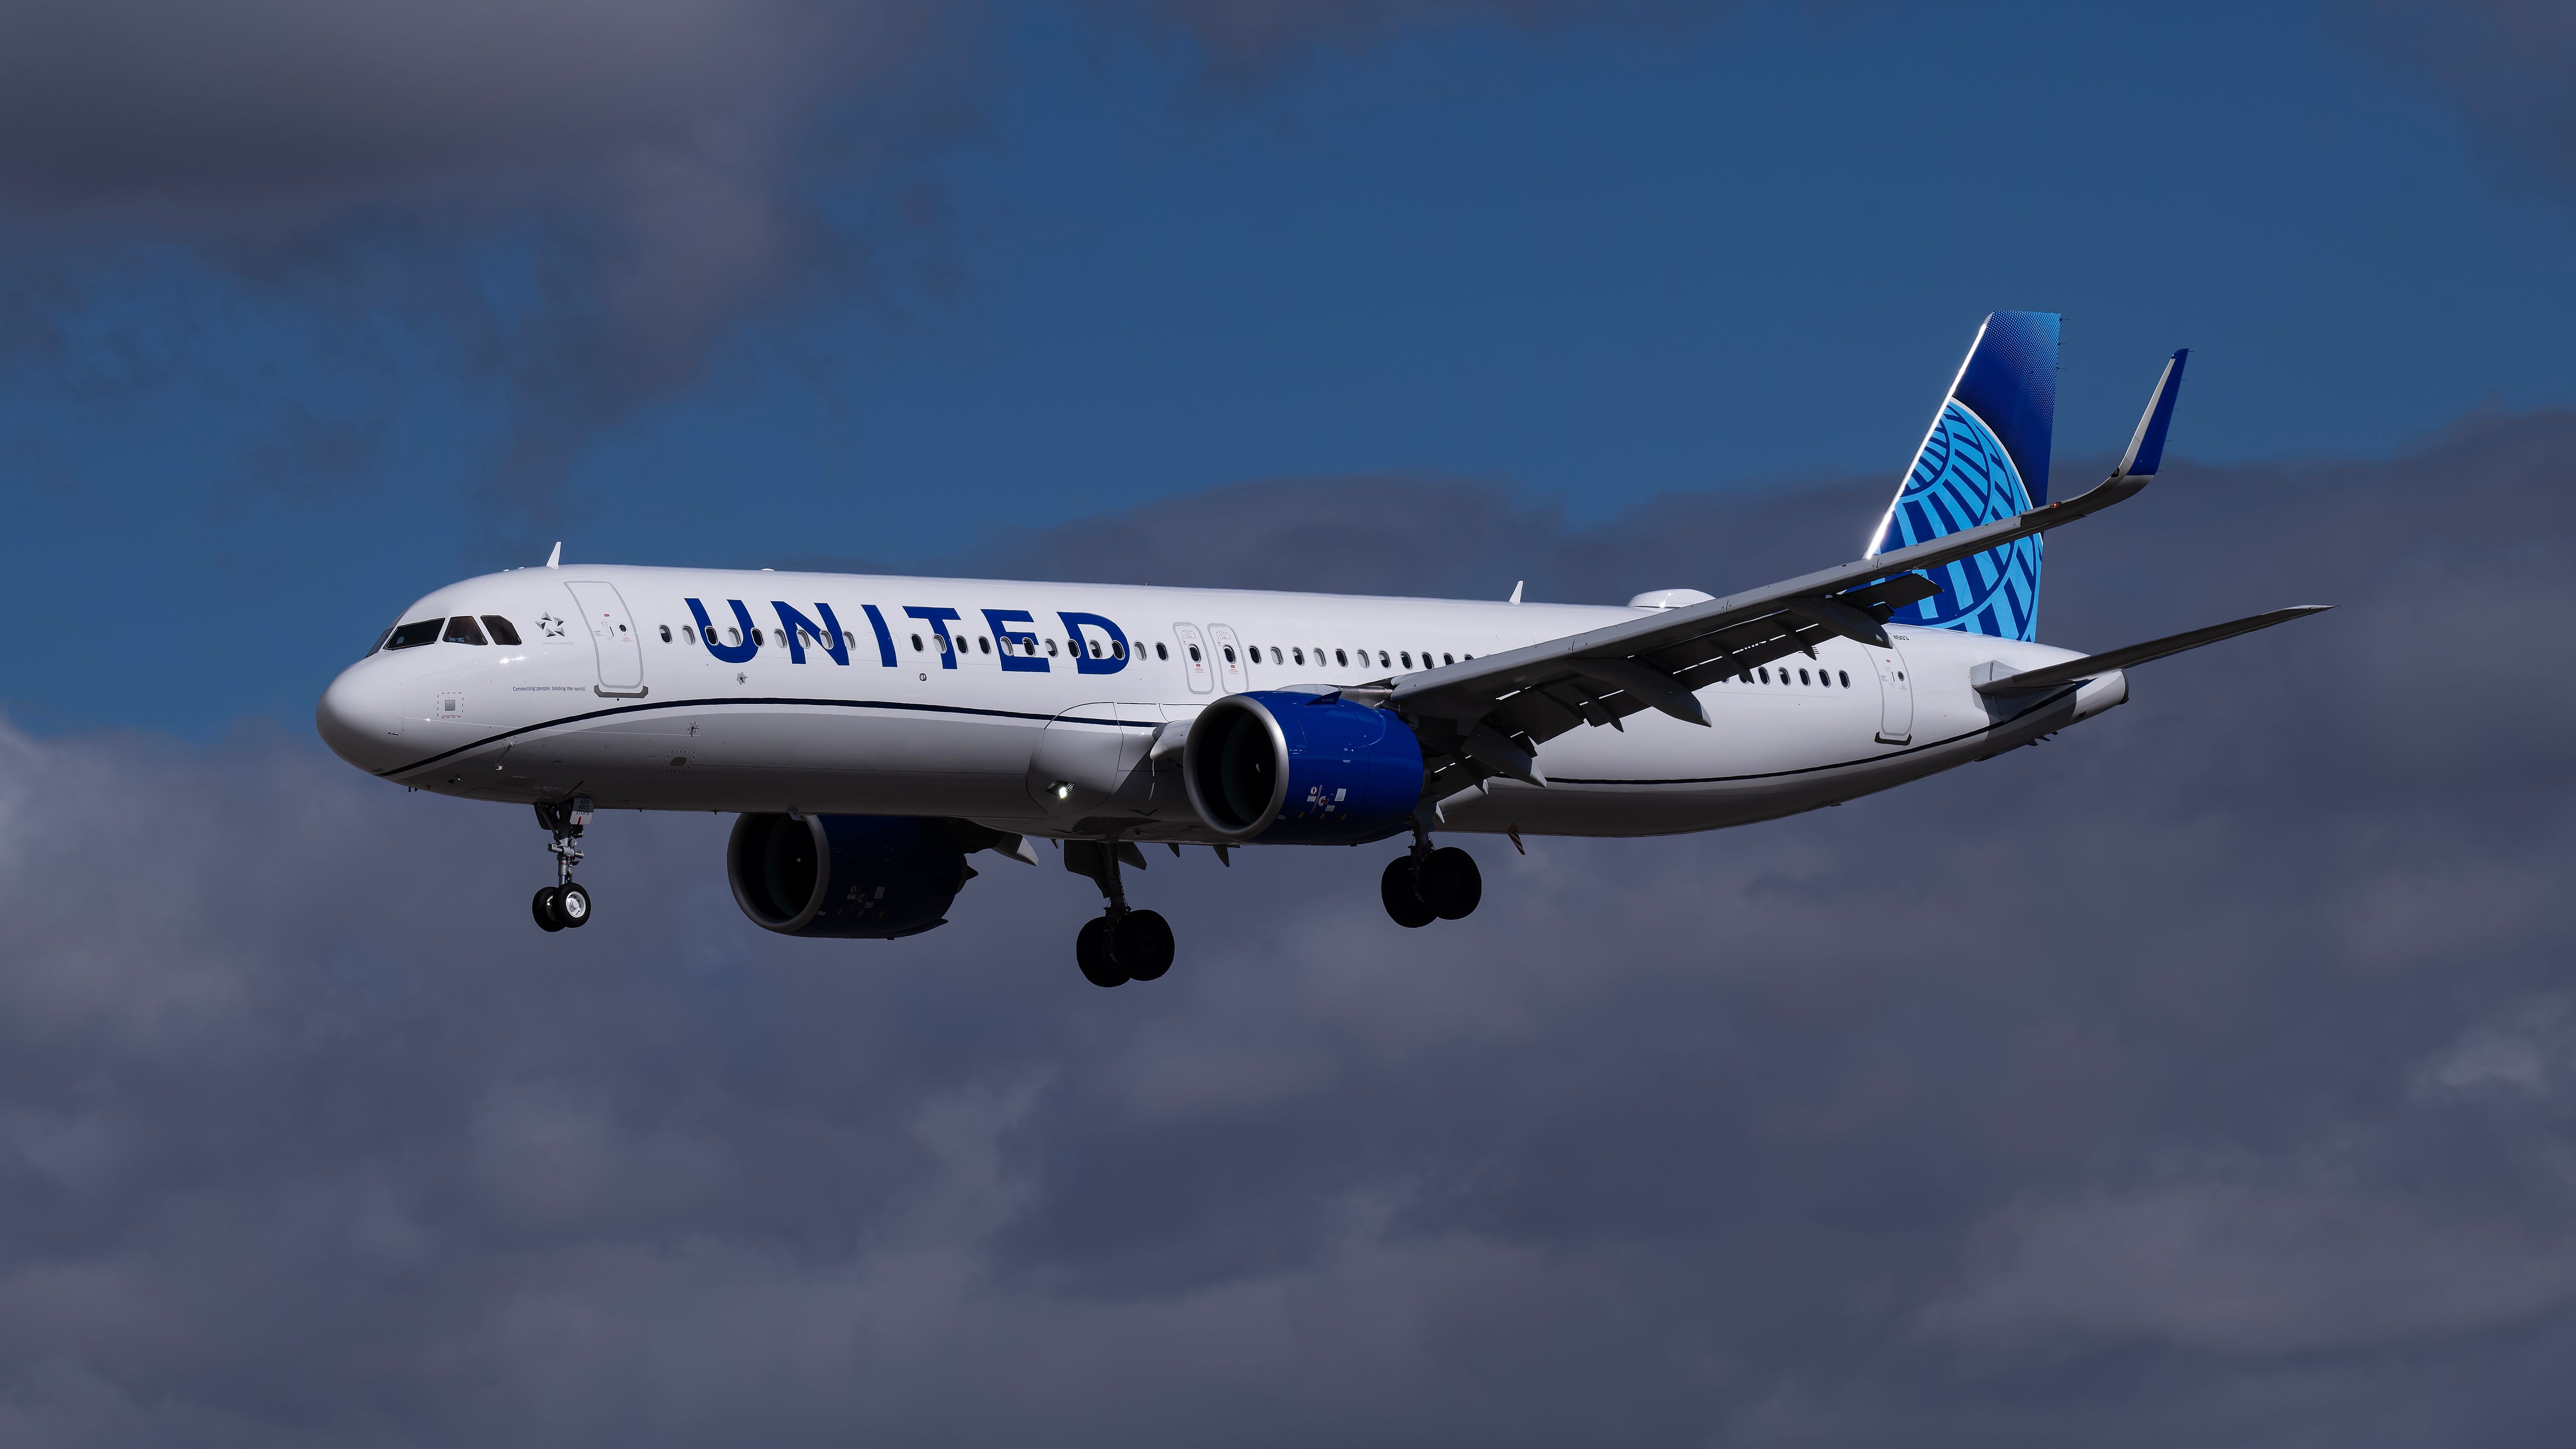 A United Airlines Airbus A321neo flying in the sky.